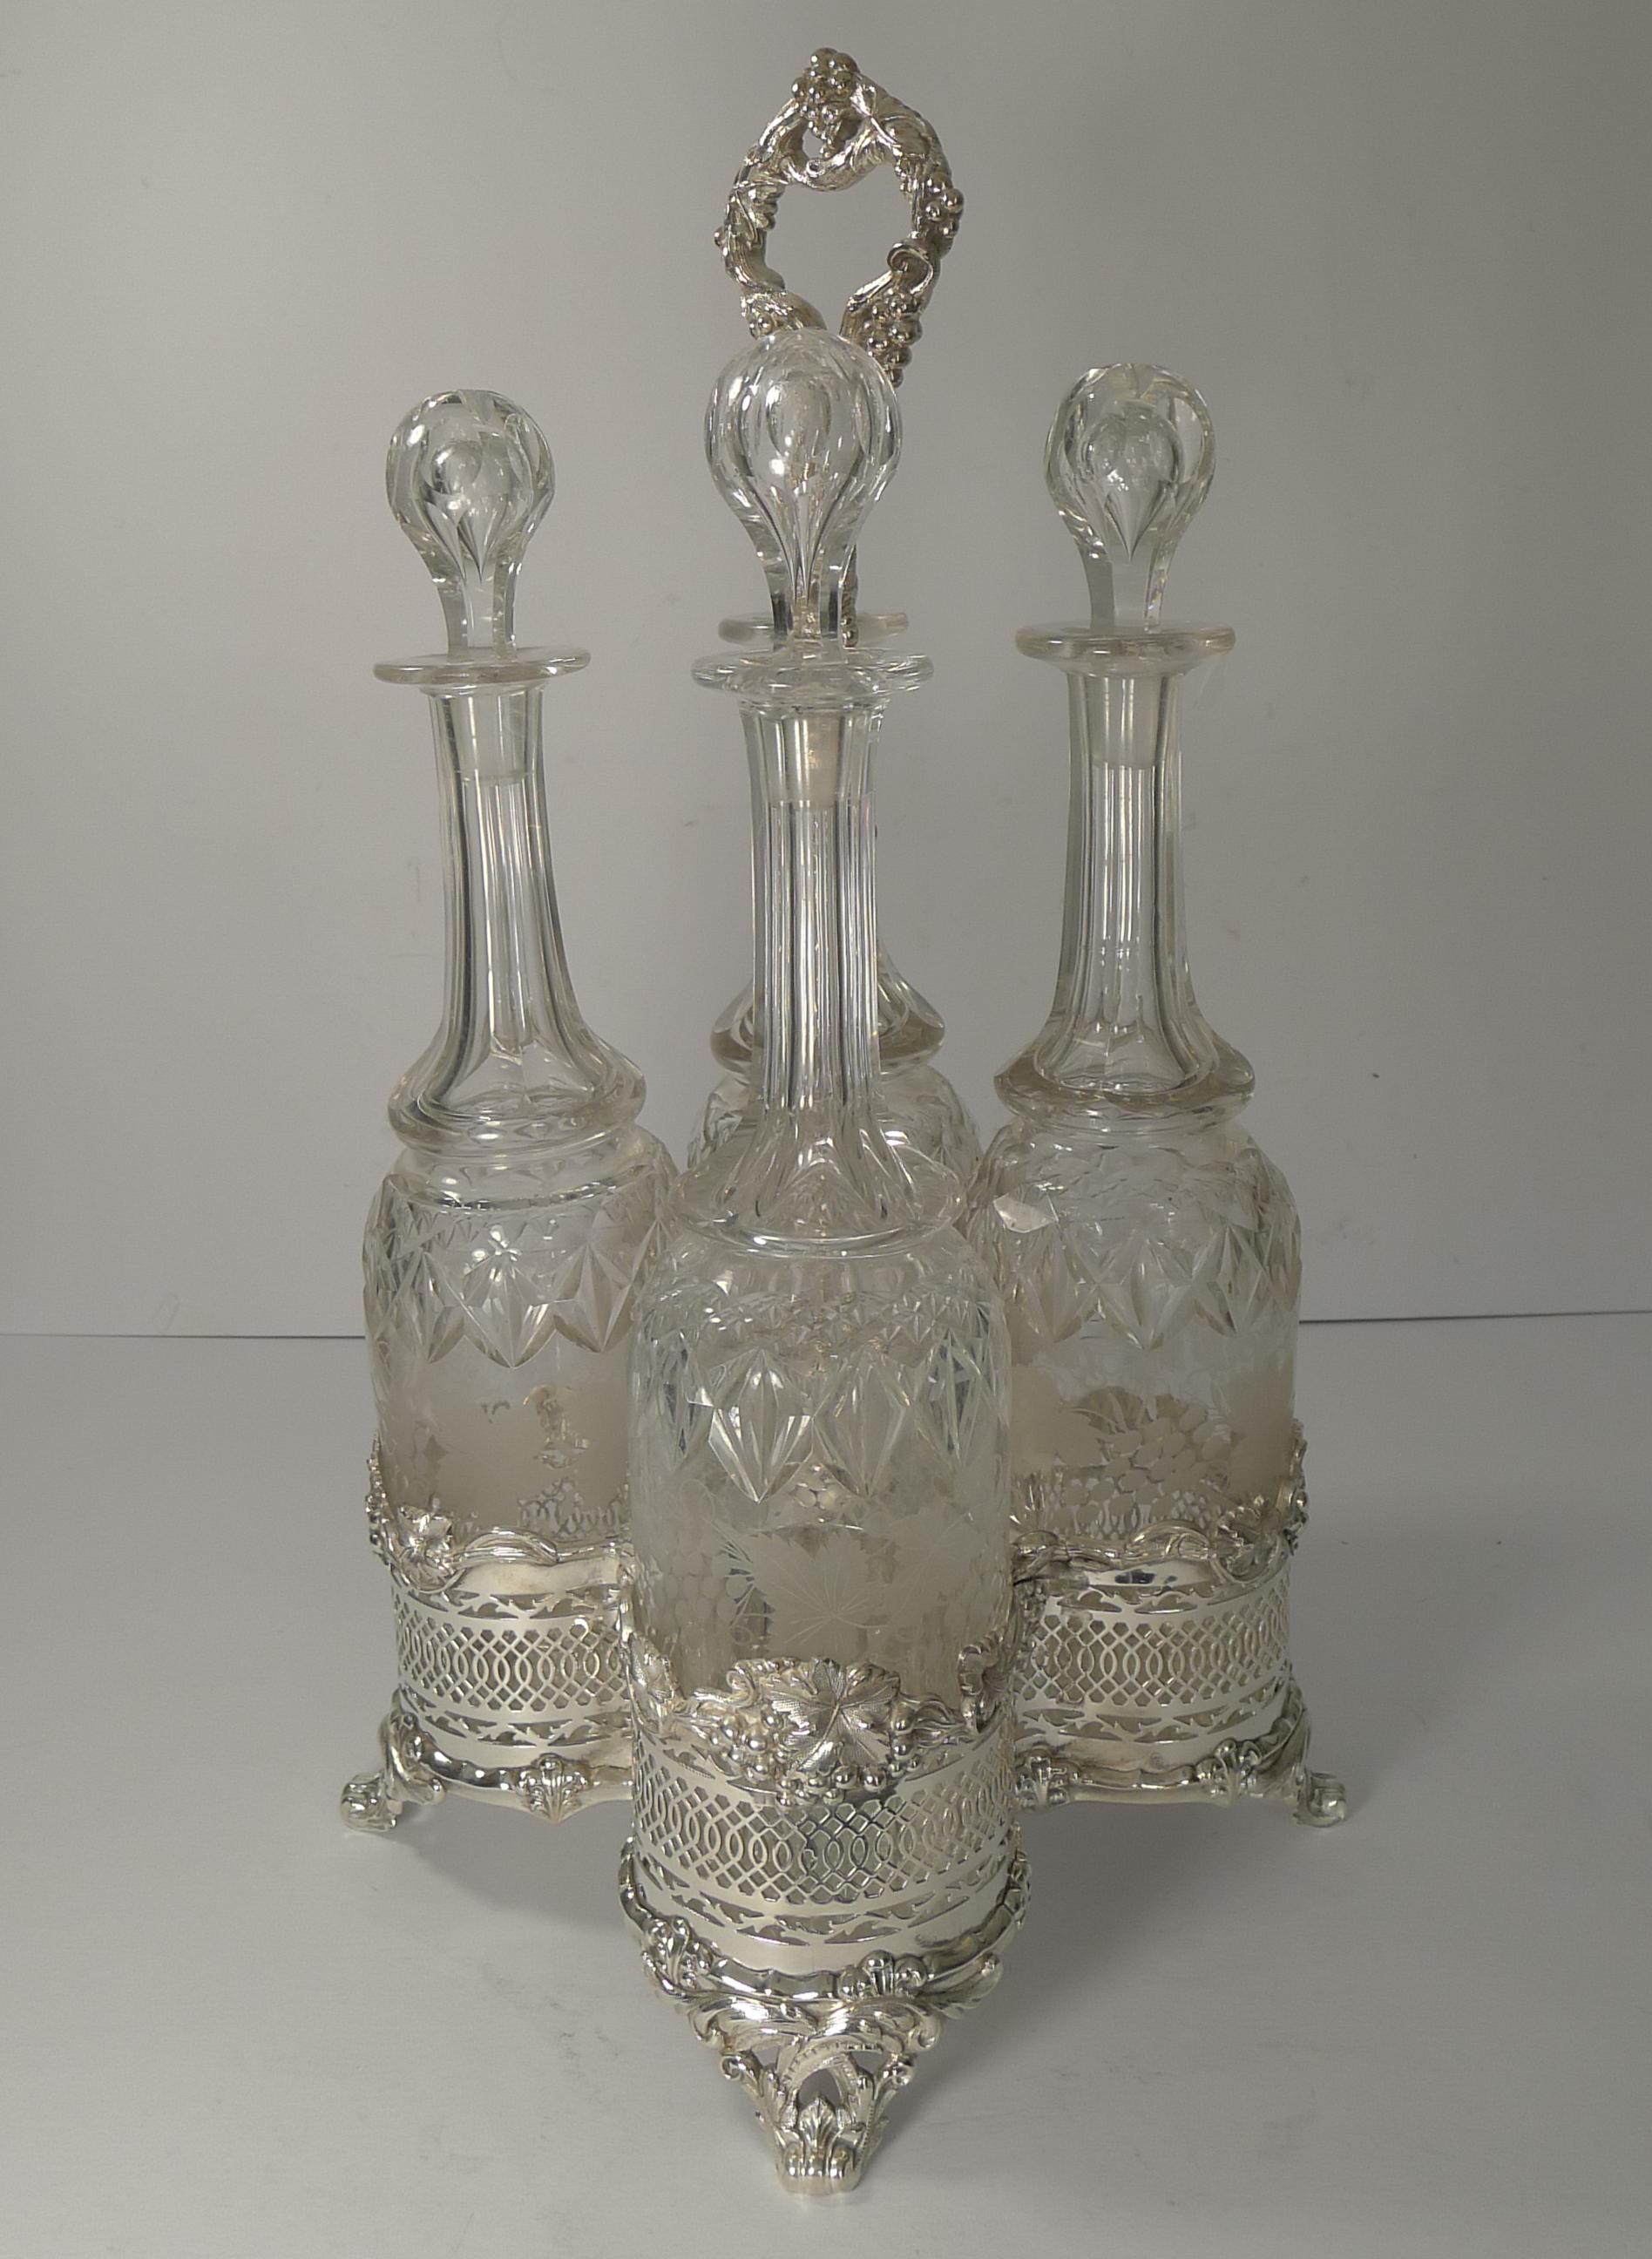 Four Antique English Wine Decanters in Stand, circa 1890 For Sale 5